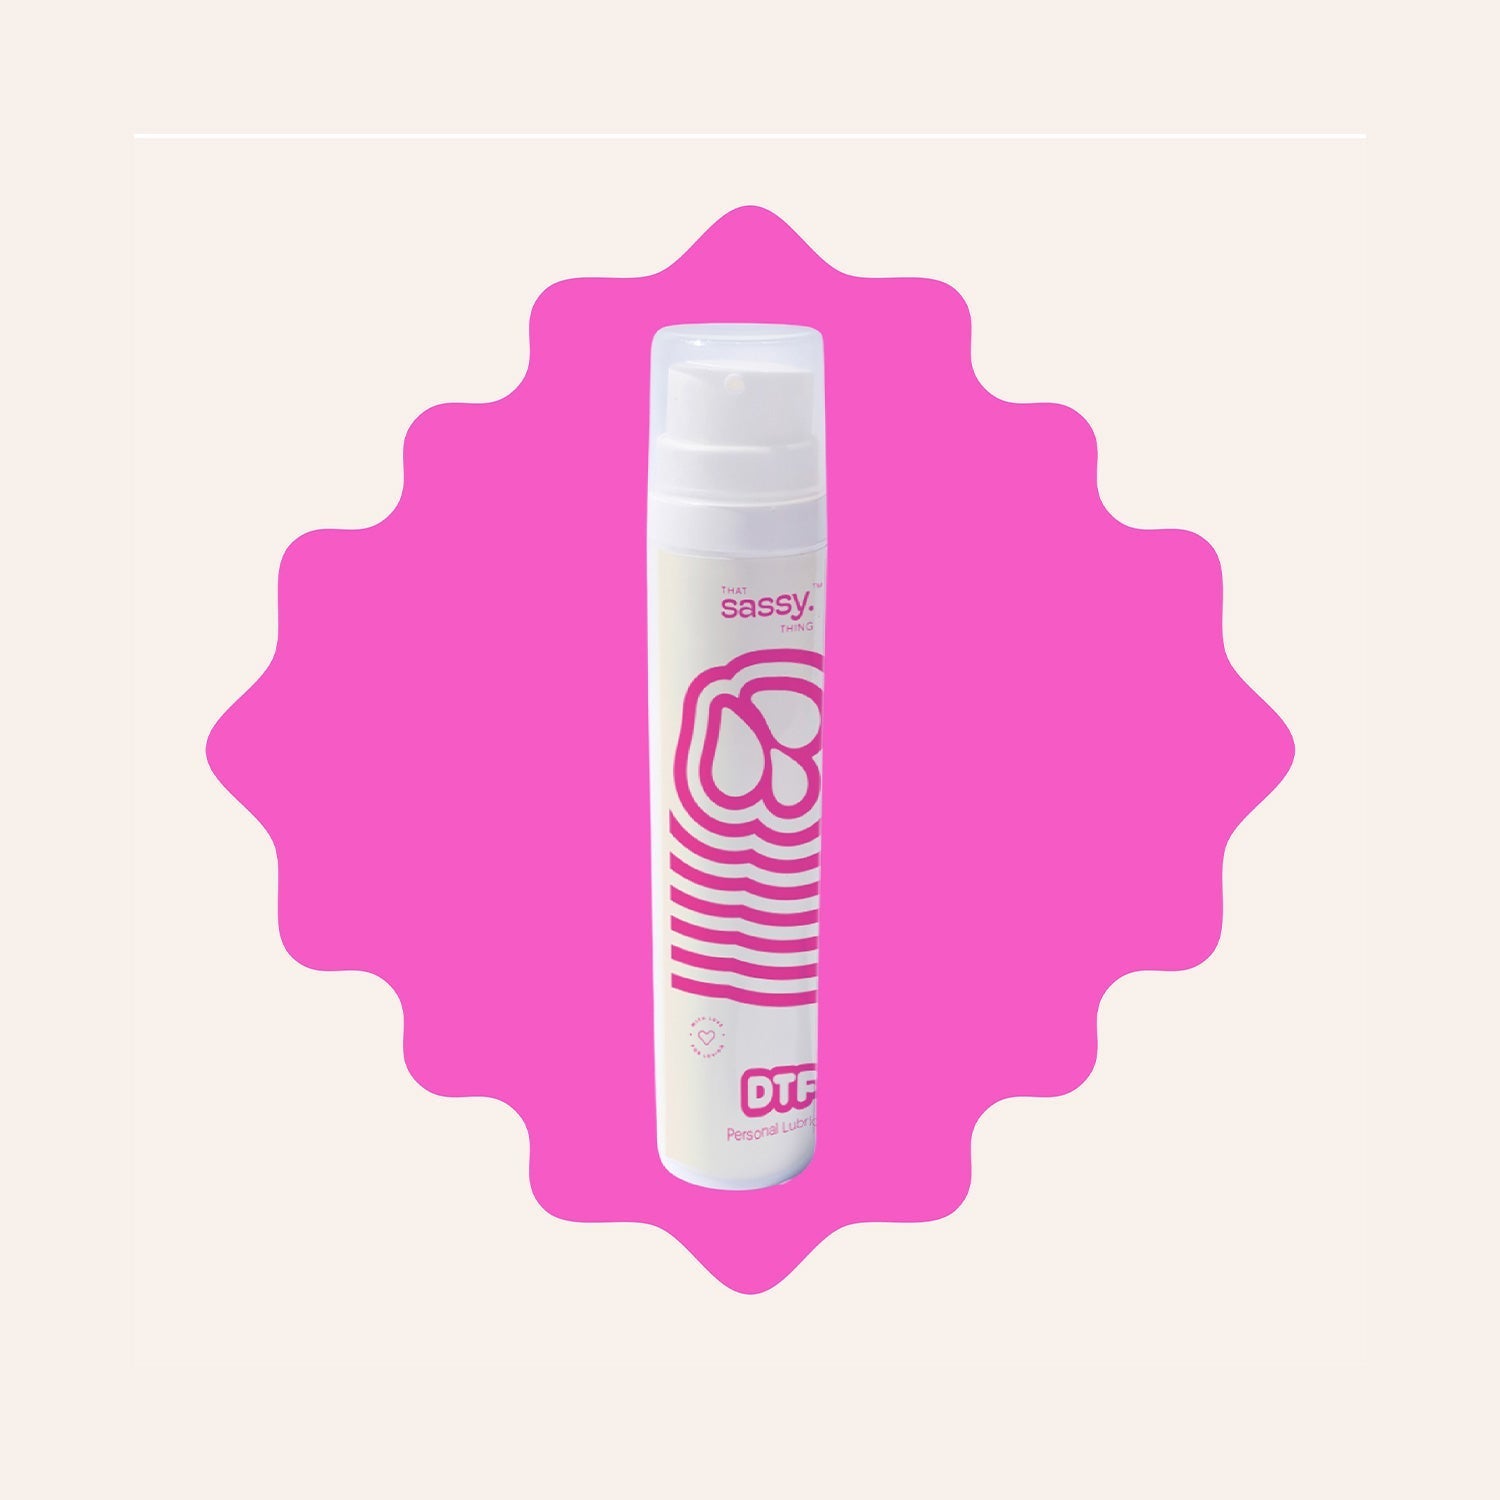 DTF All Natural Water-Based Personal Lubrication Gel Kept On A Pink Background.